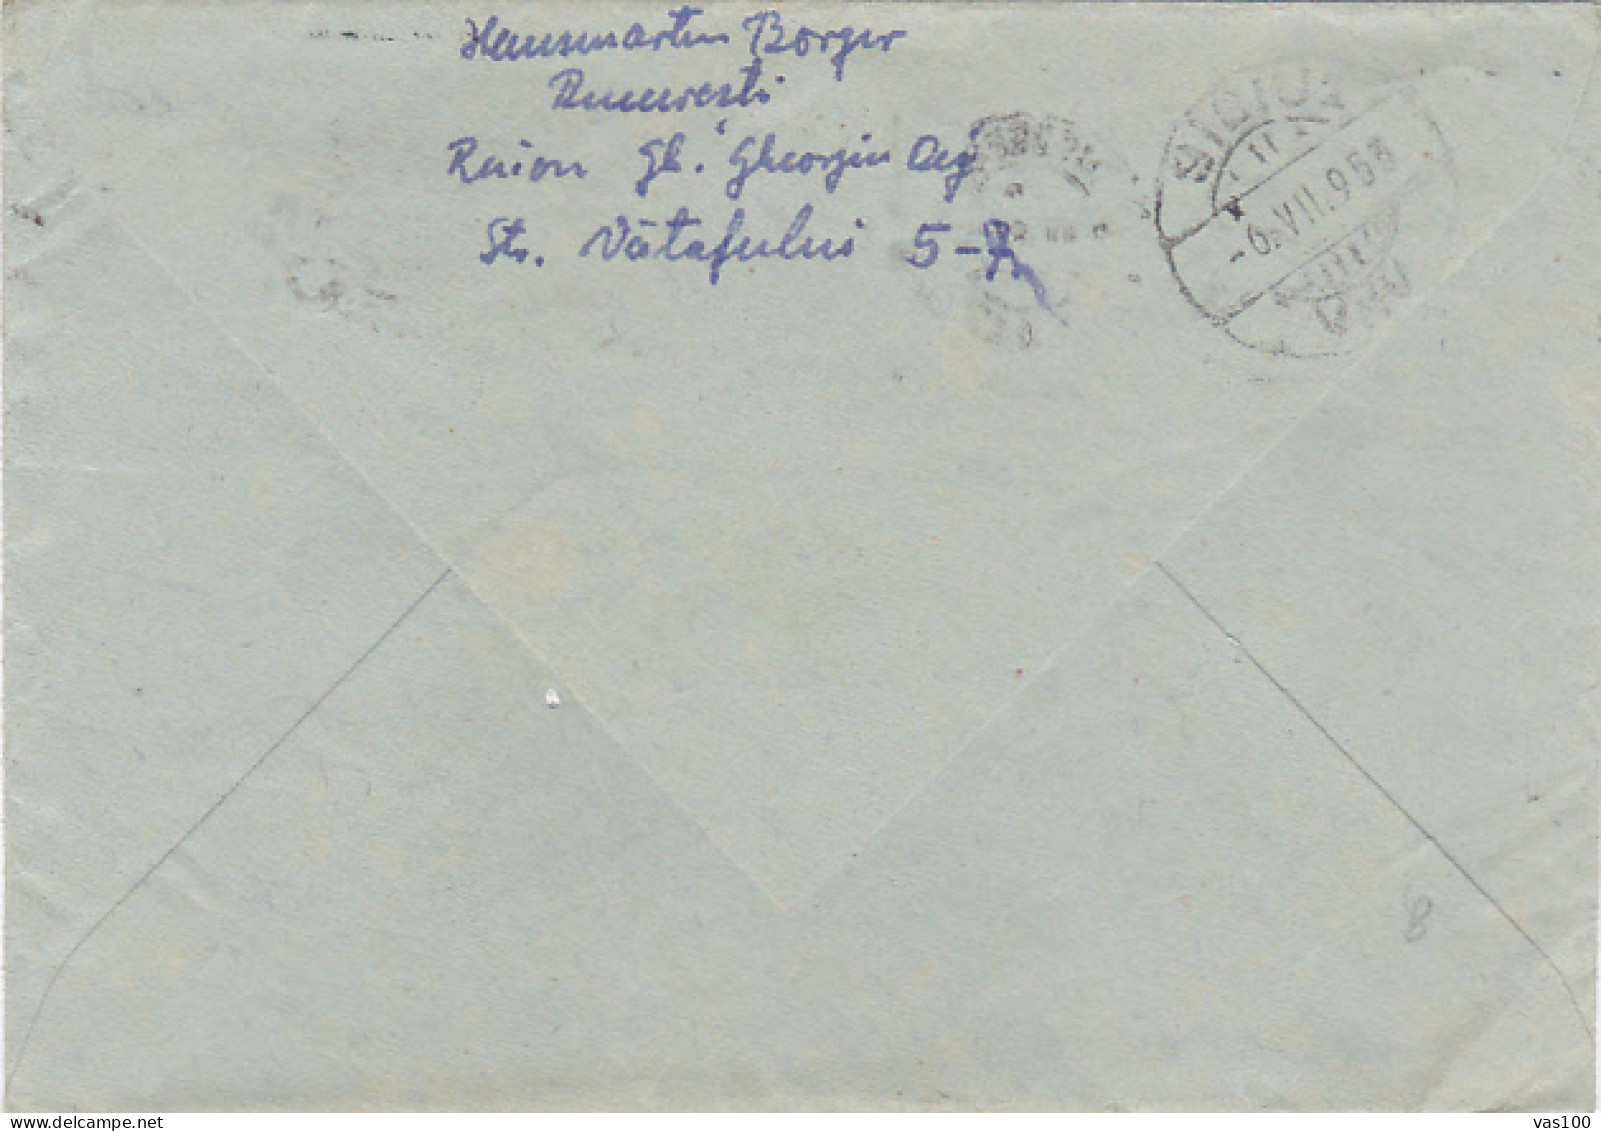 AGRICULTURE, STAMPS ON COVER, 1953, ROMANIA - Cartas & Documentos